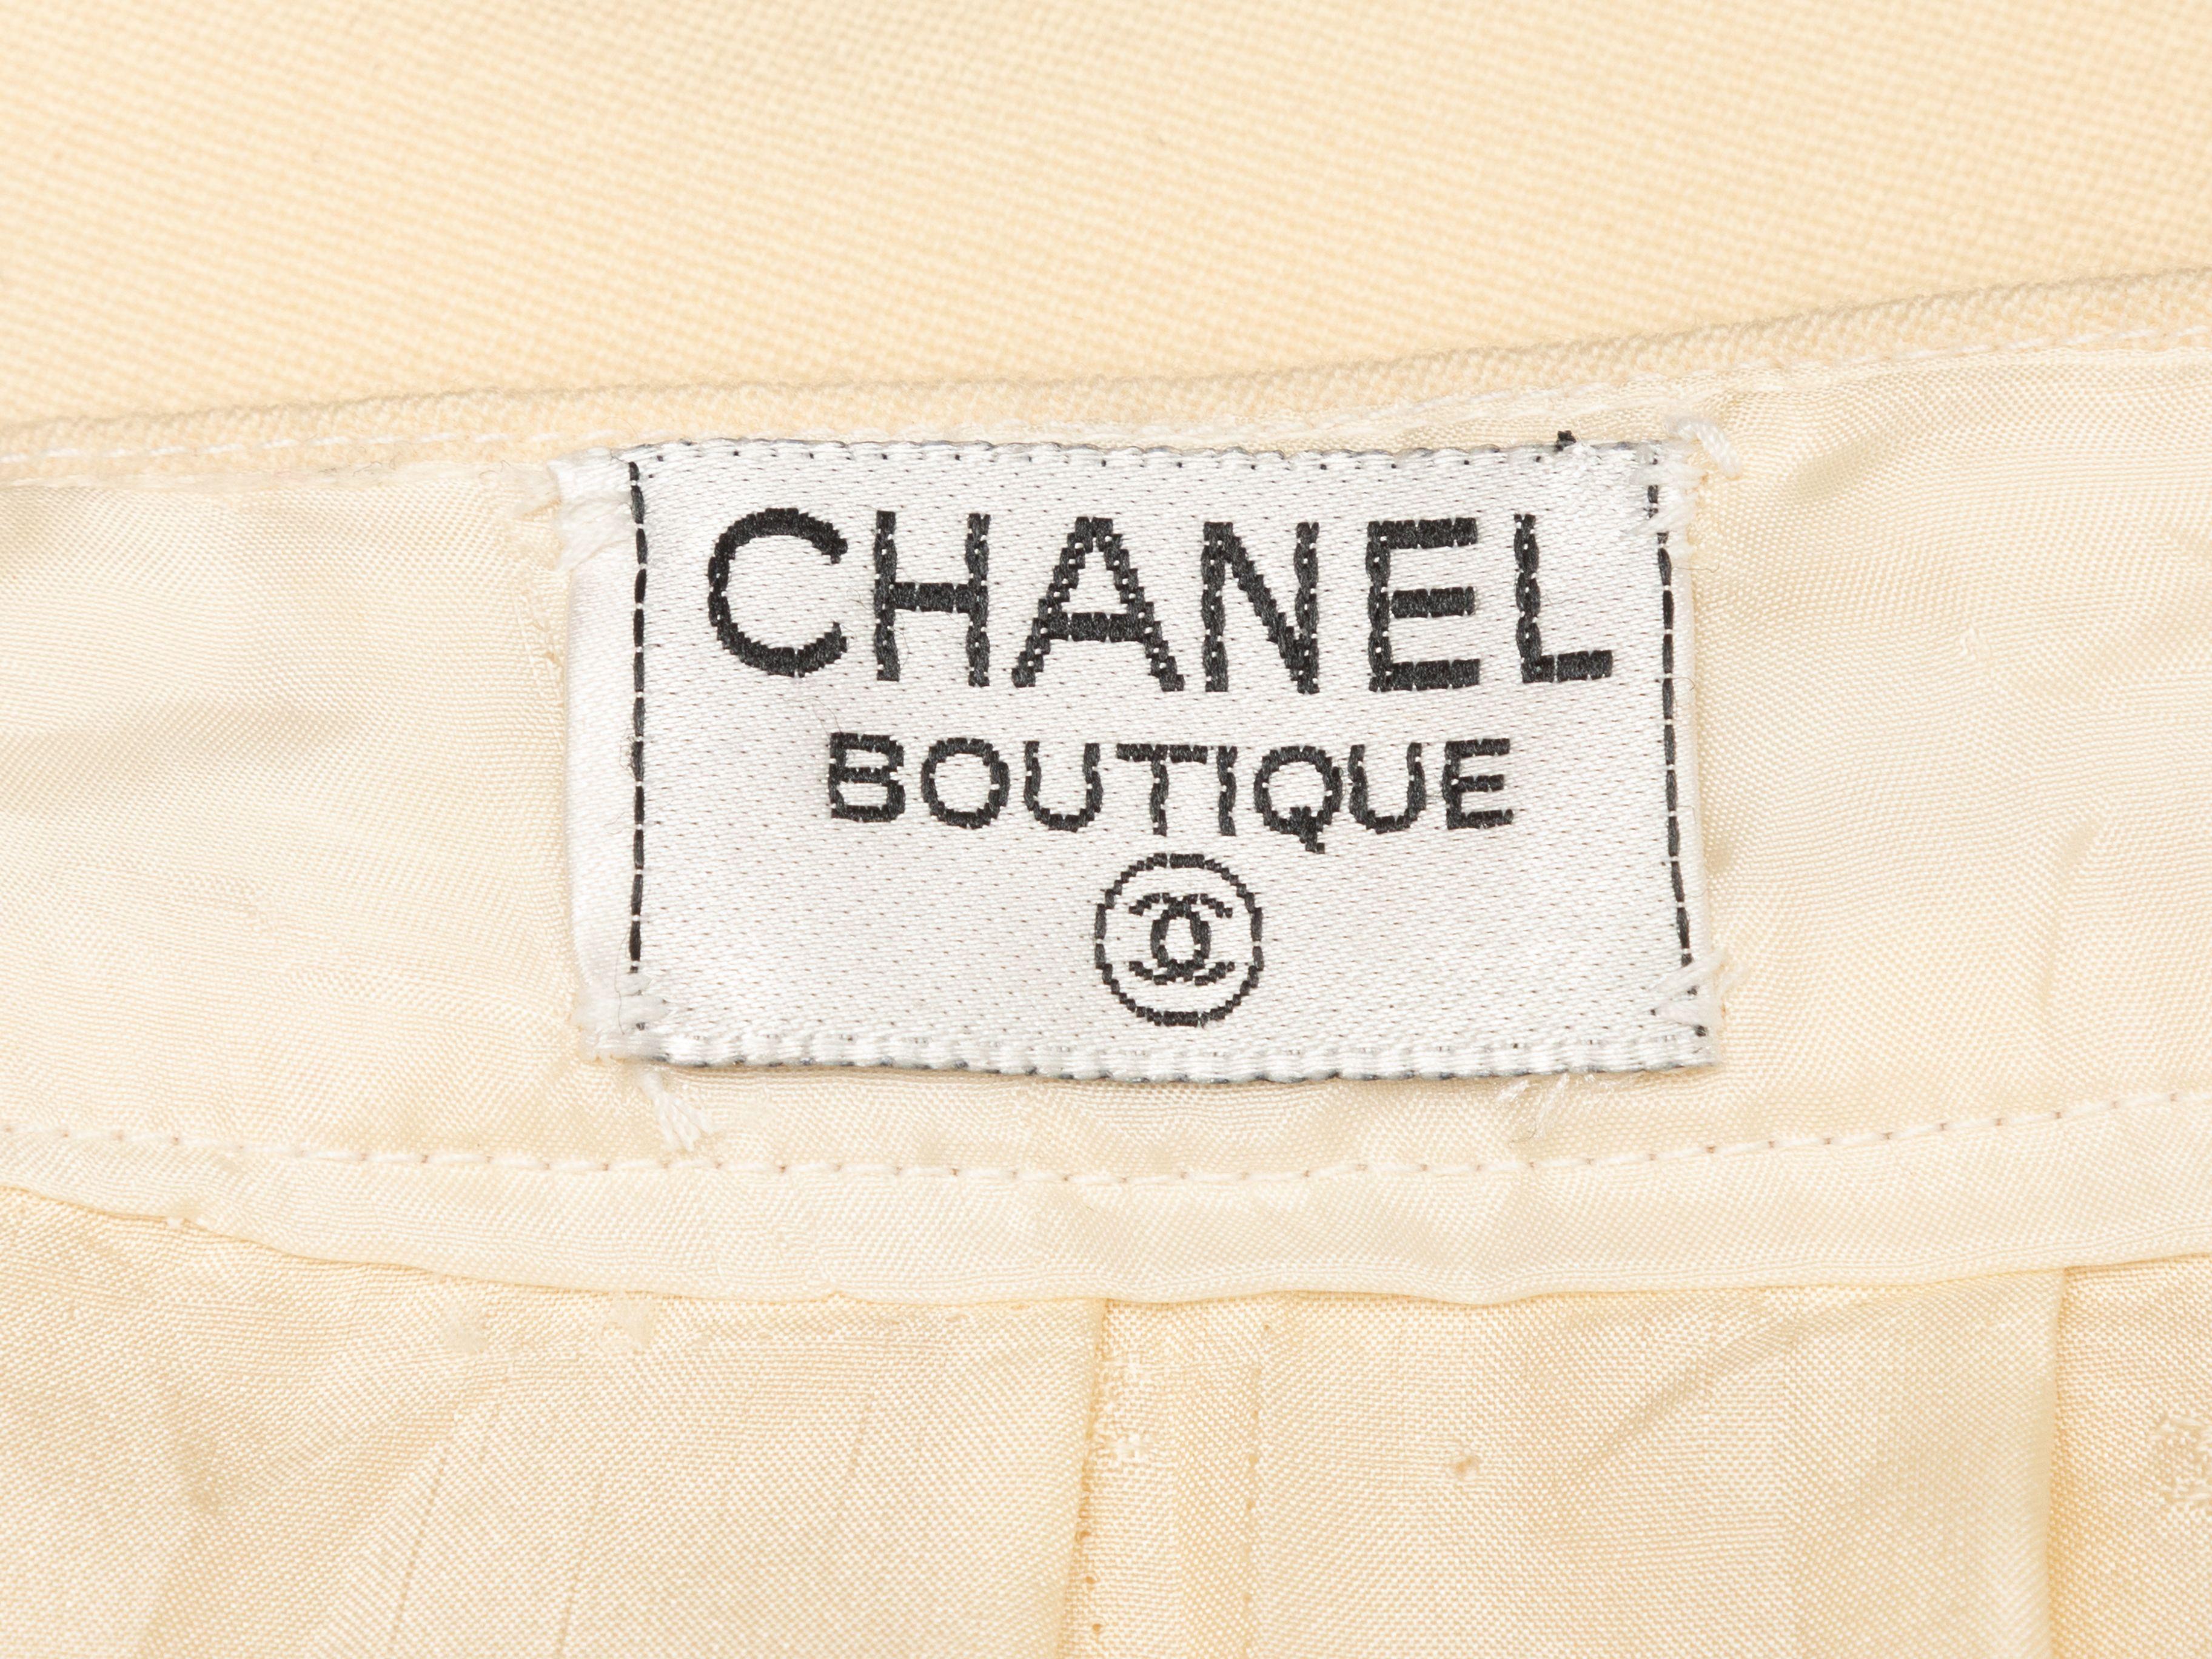 Product Details: Vintage cream wool knee-length pencil skirt by Chanel Boutique. Gold-tone button accents at back hem vent. Zip closure at center back. 26